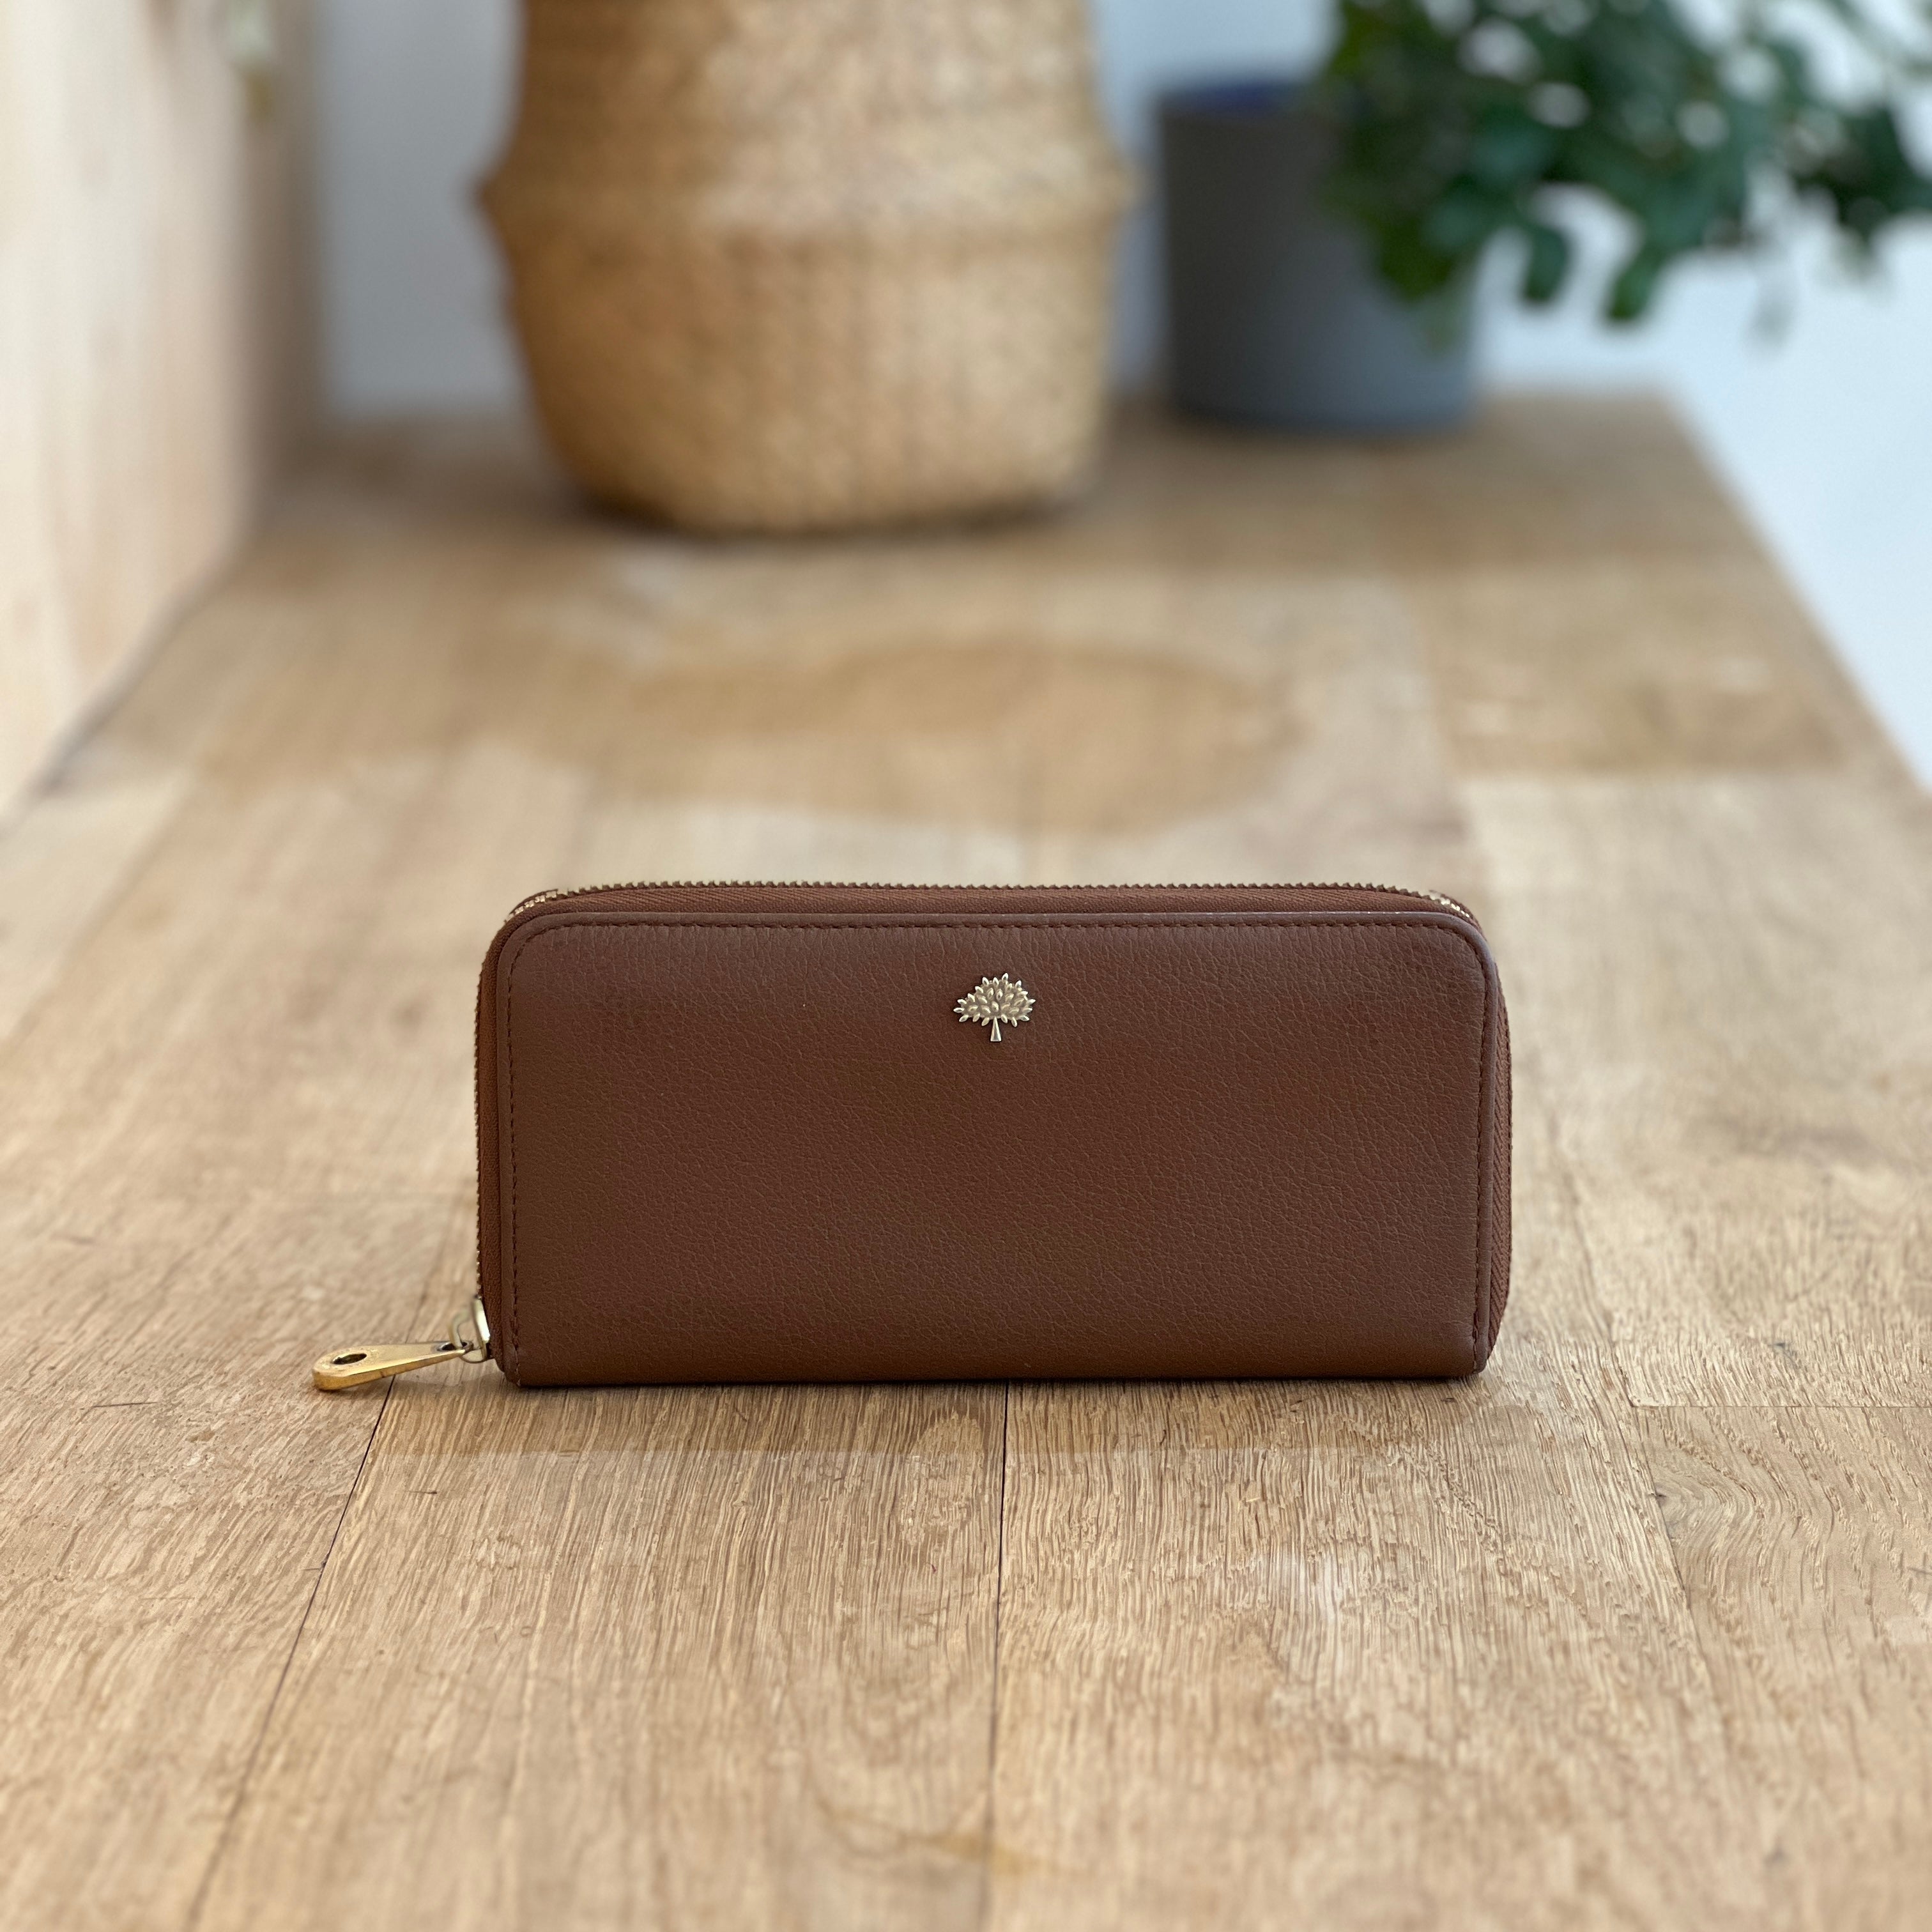 Mulberry Tree Continental Wallet